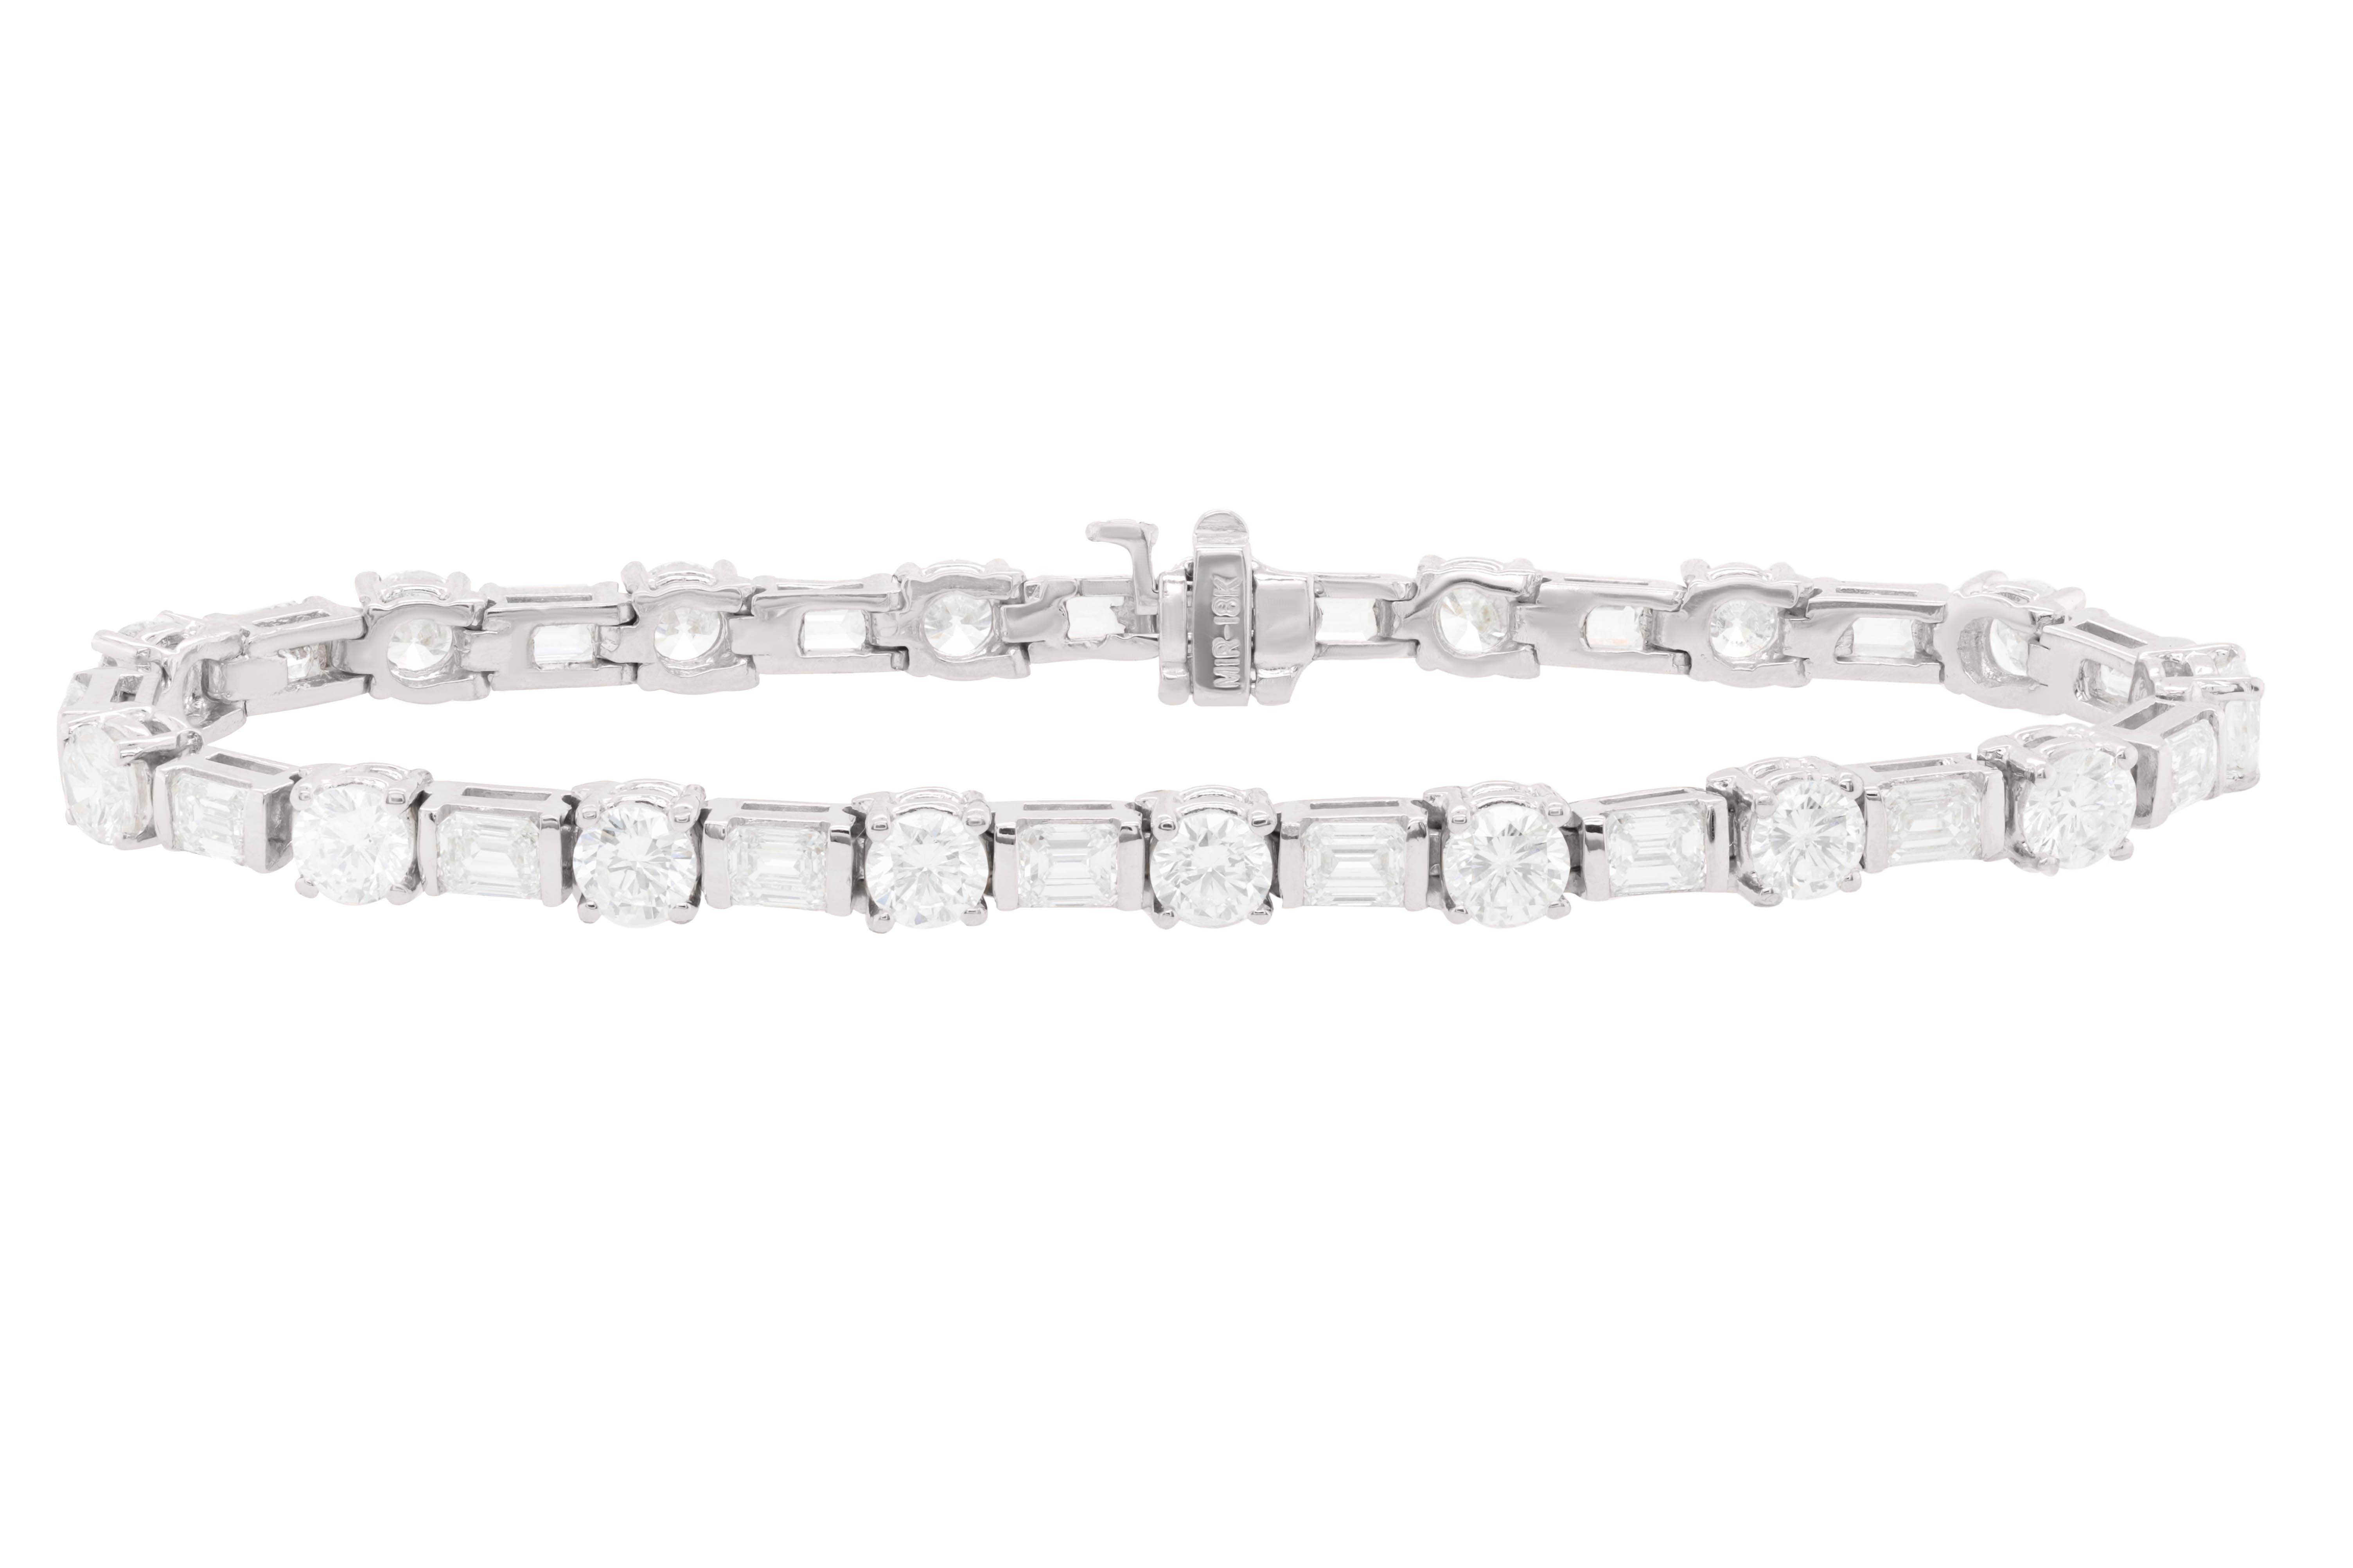 18kt white bracelet 7.00ct baquette and round diamonds 34 stones
Diana M. is a leading supplier of top-quality fine jewelry for over 35 years.
Diana M is one-stop shop for all your jewelry shopping, carrying line of diamond rings, earrings,